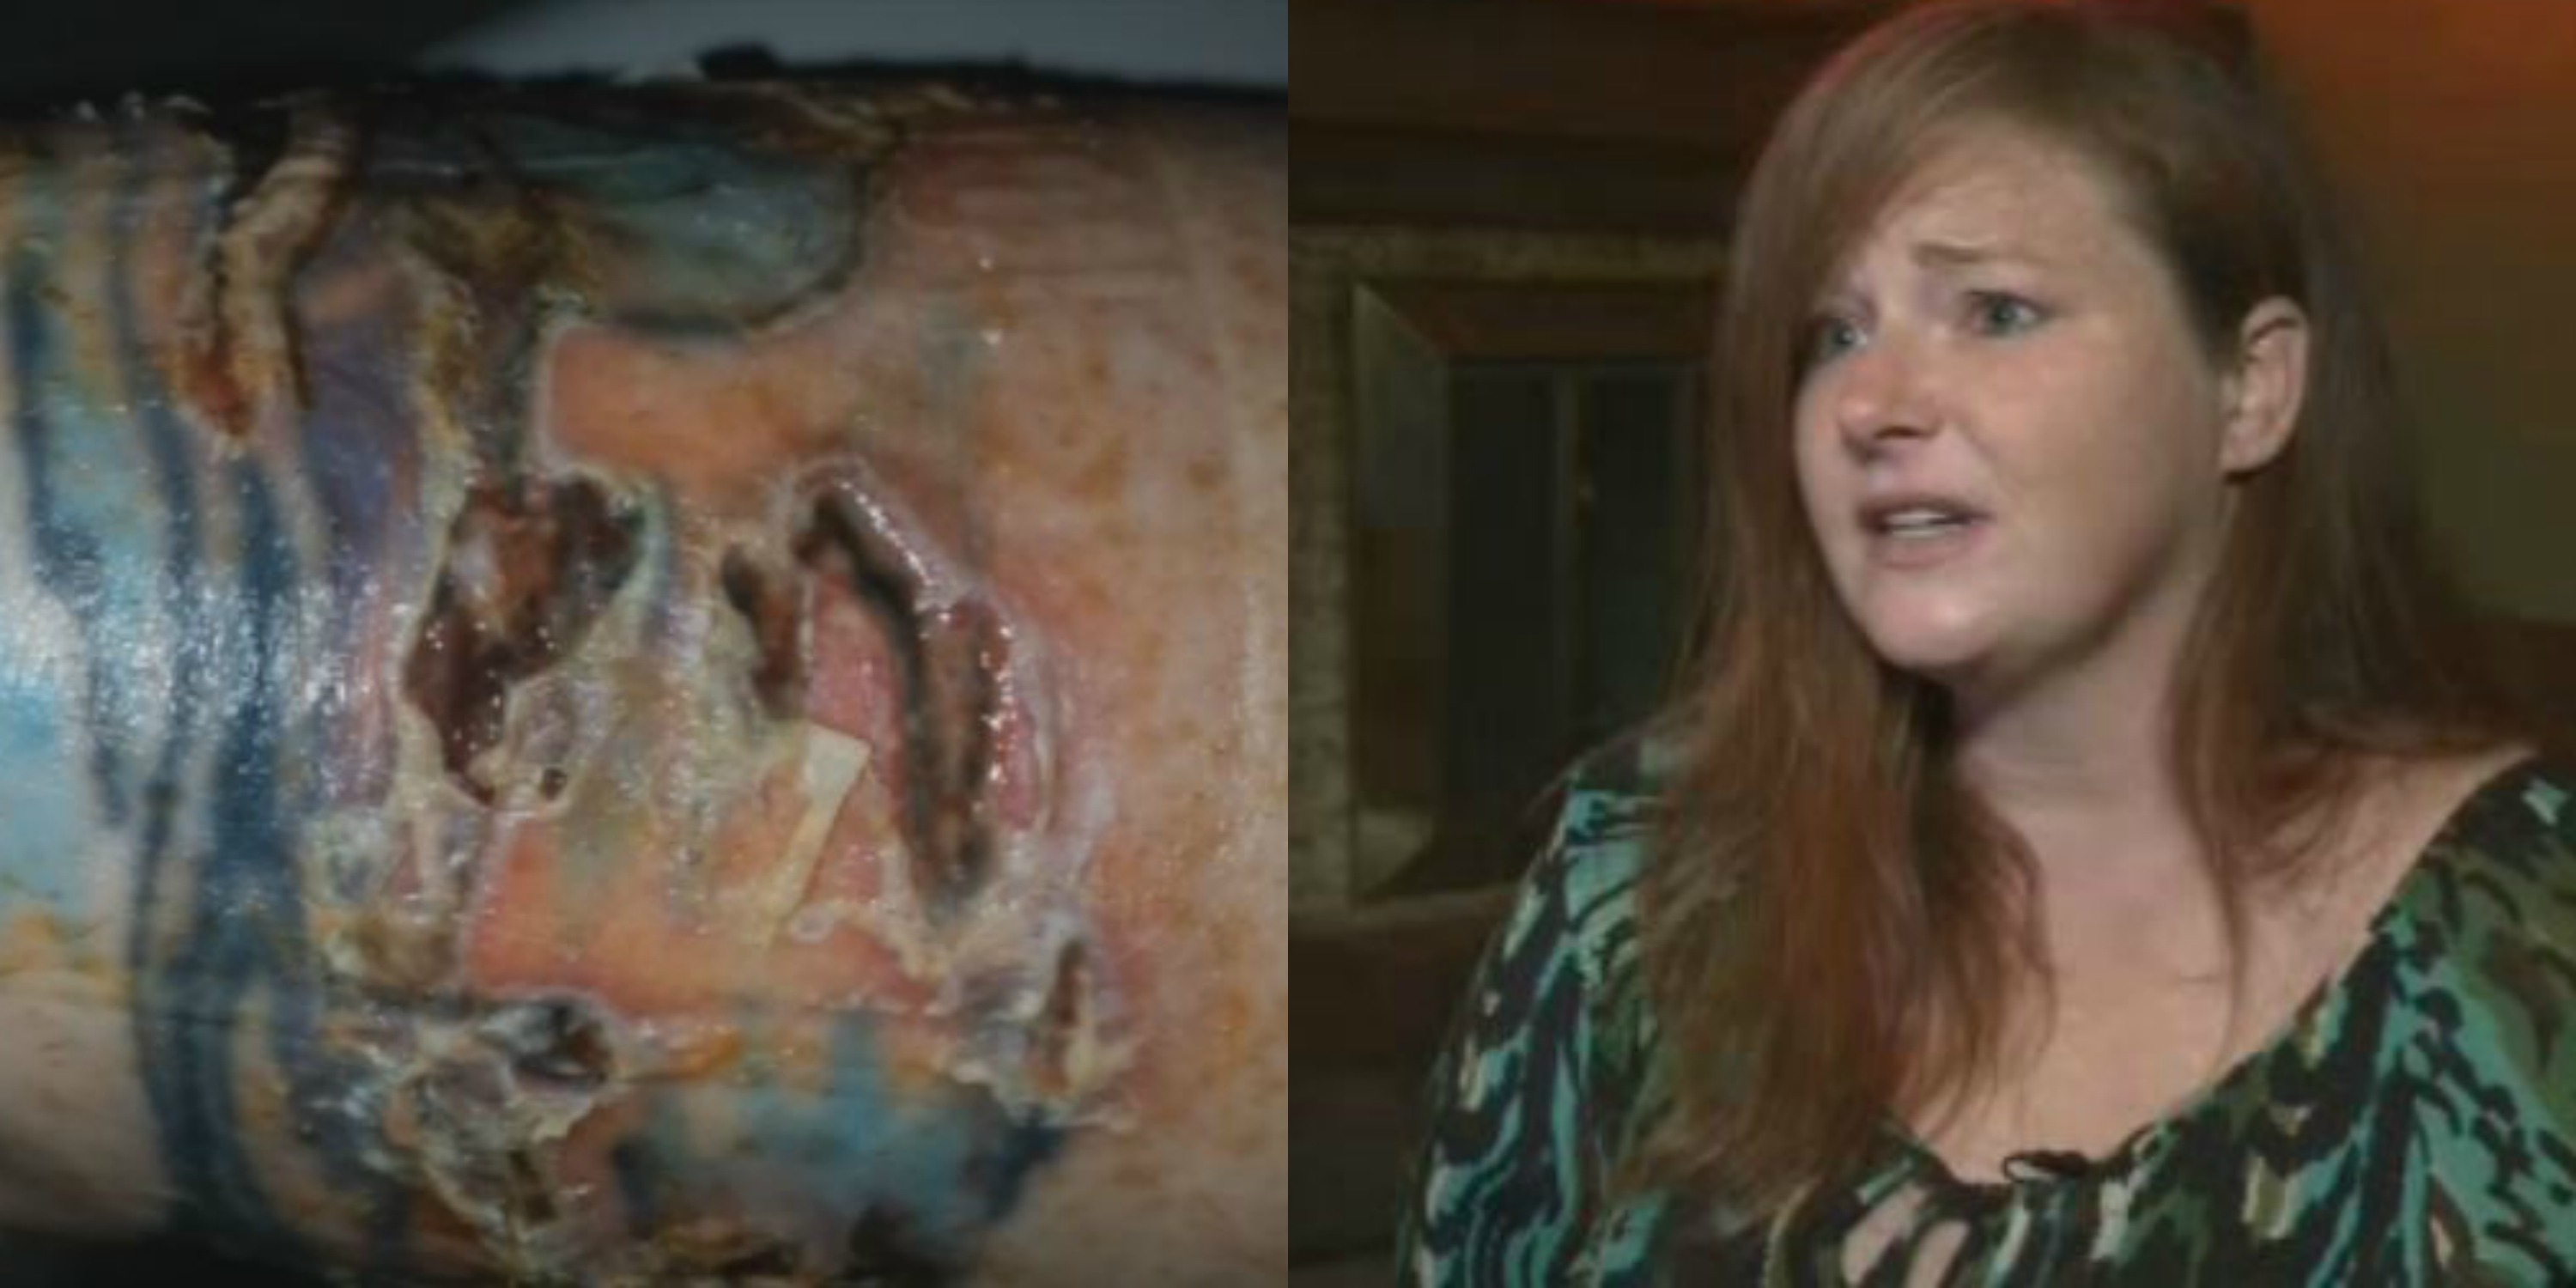 Local woman suffers 3rd-degree burns from laser hair removal